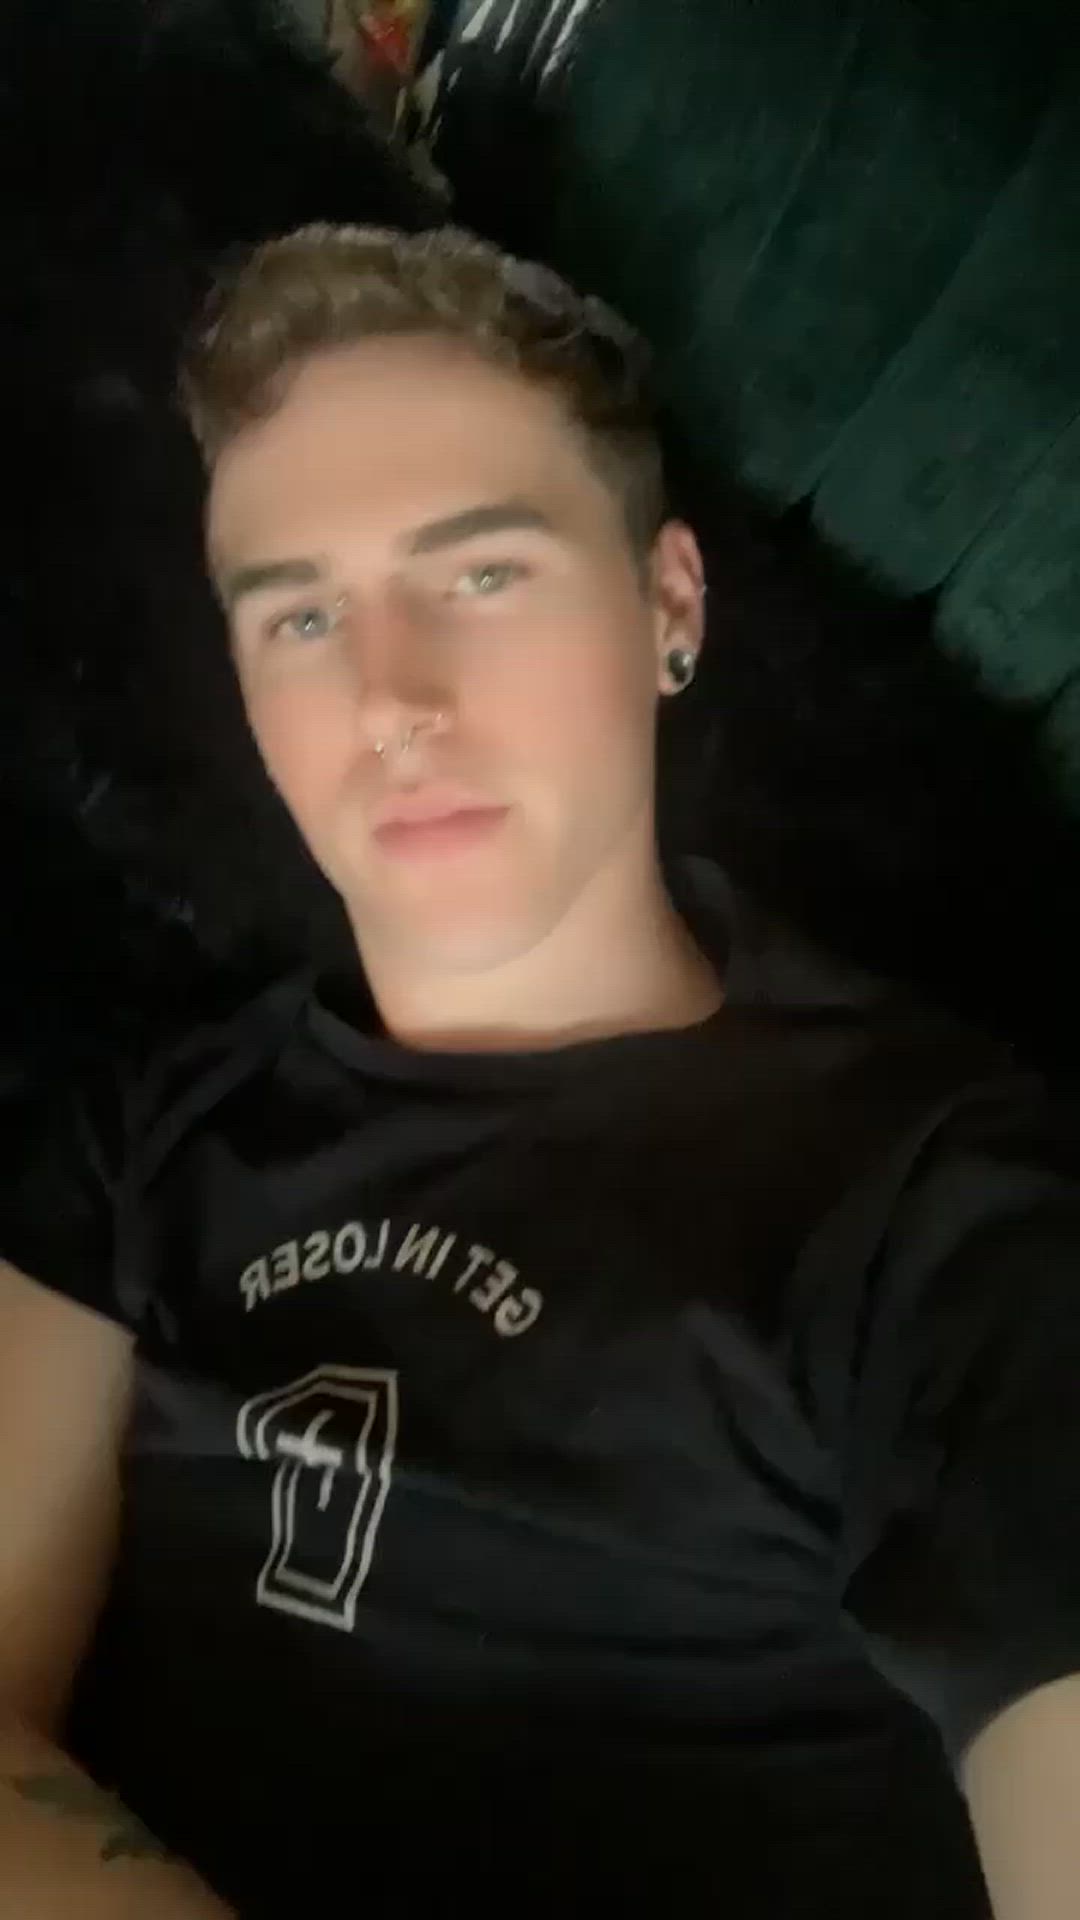 Ass porn video with onlyfans model justintime00 <strong>@justin_time00</strong>